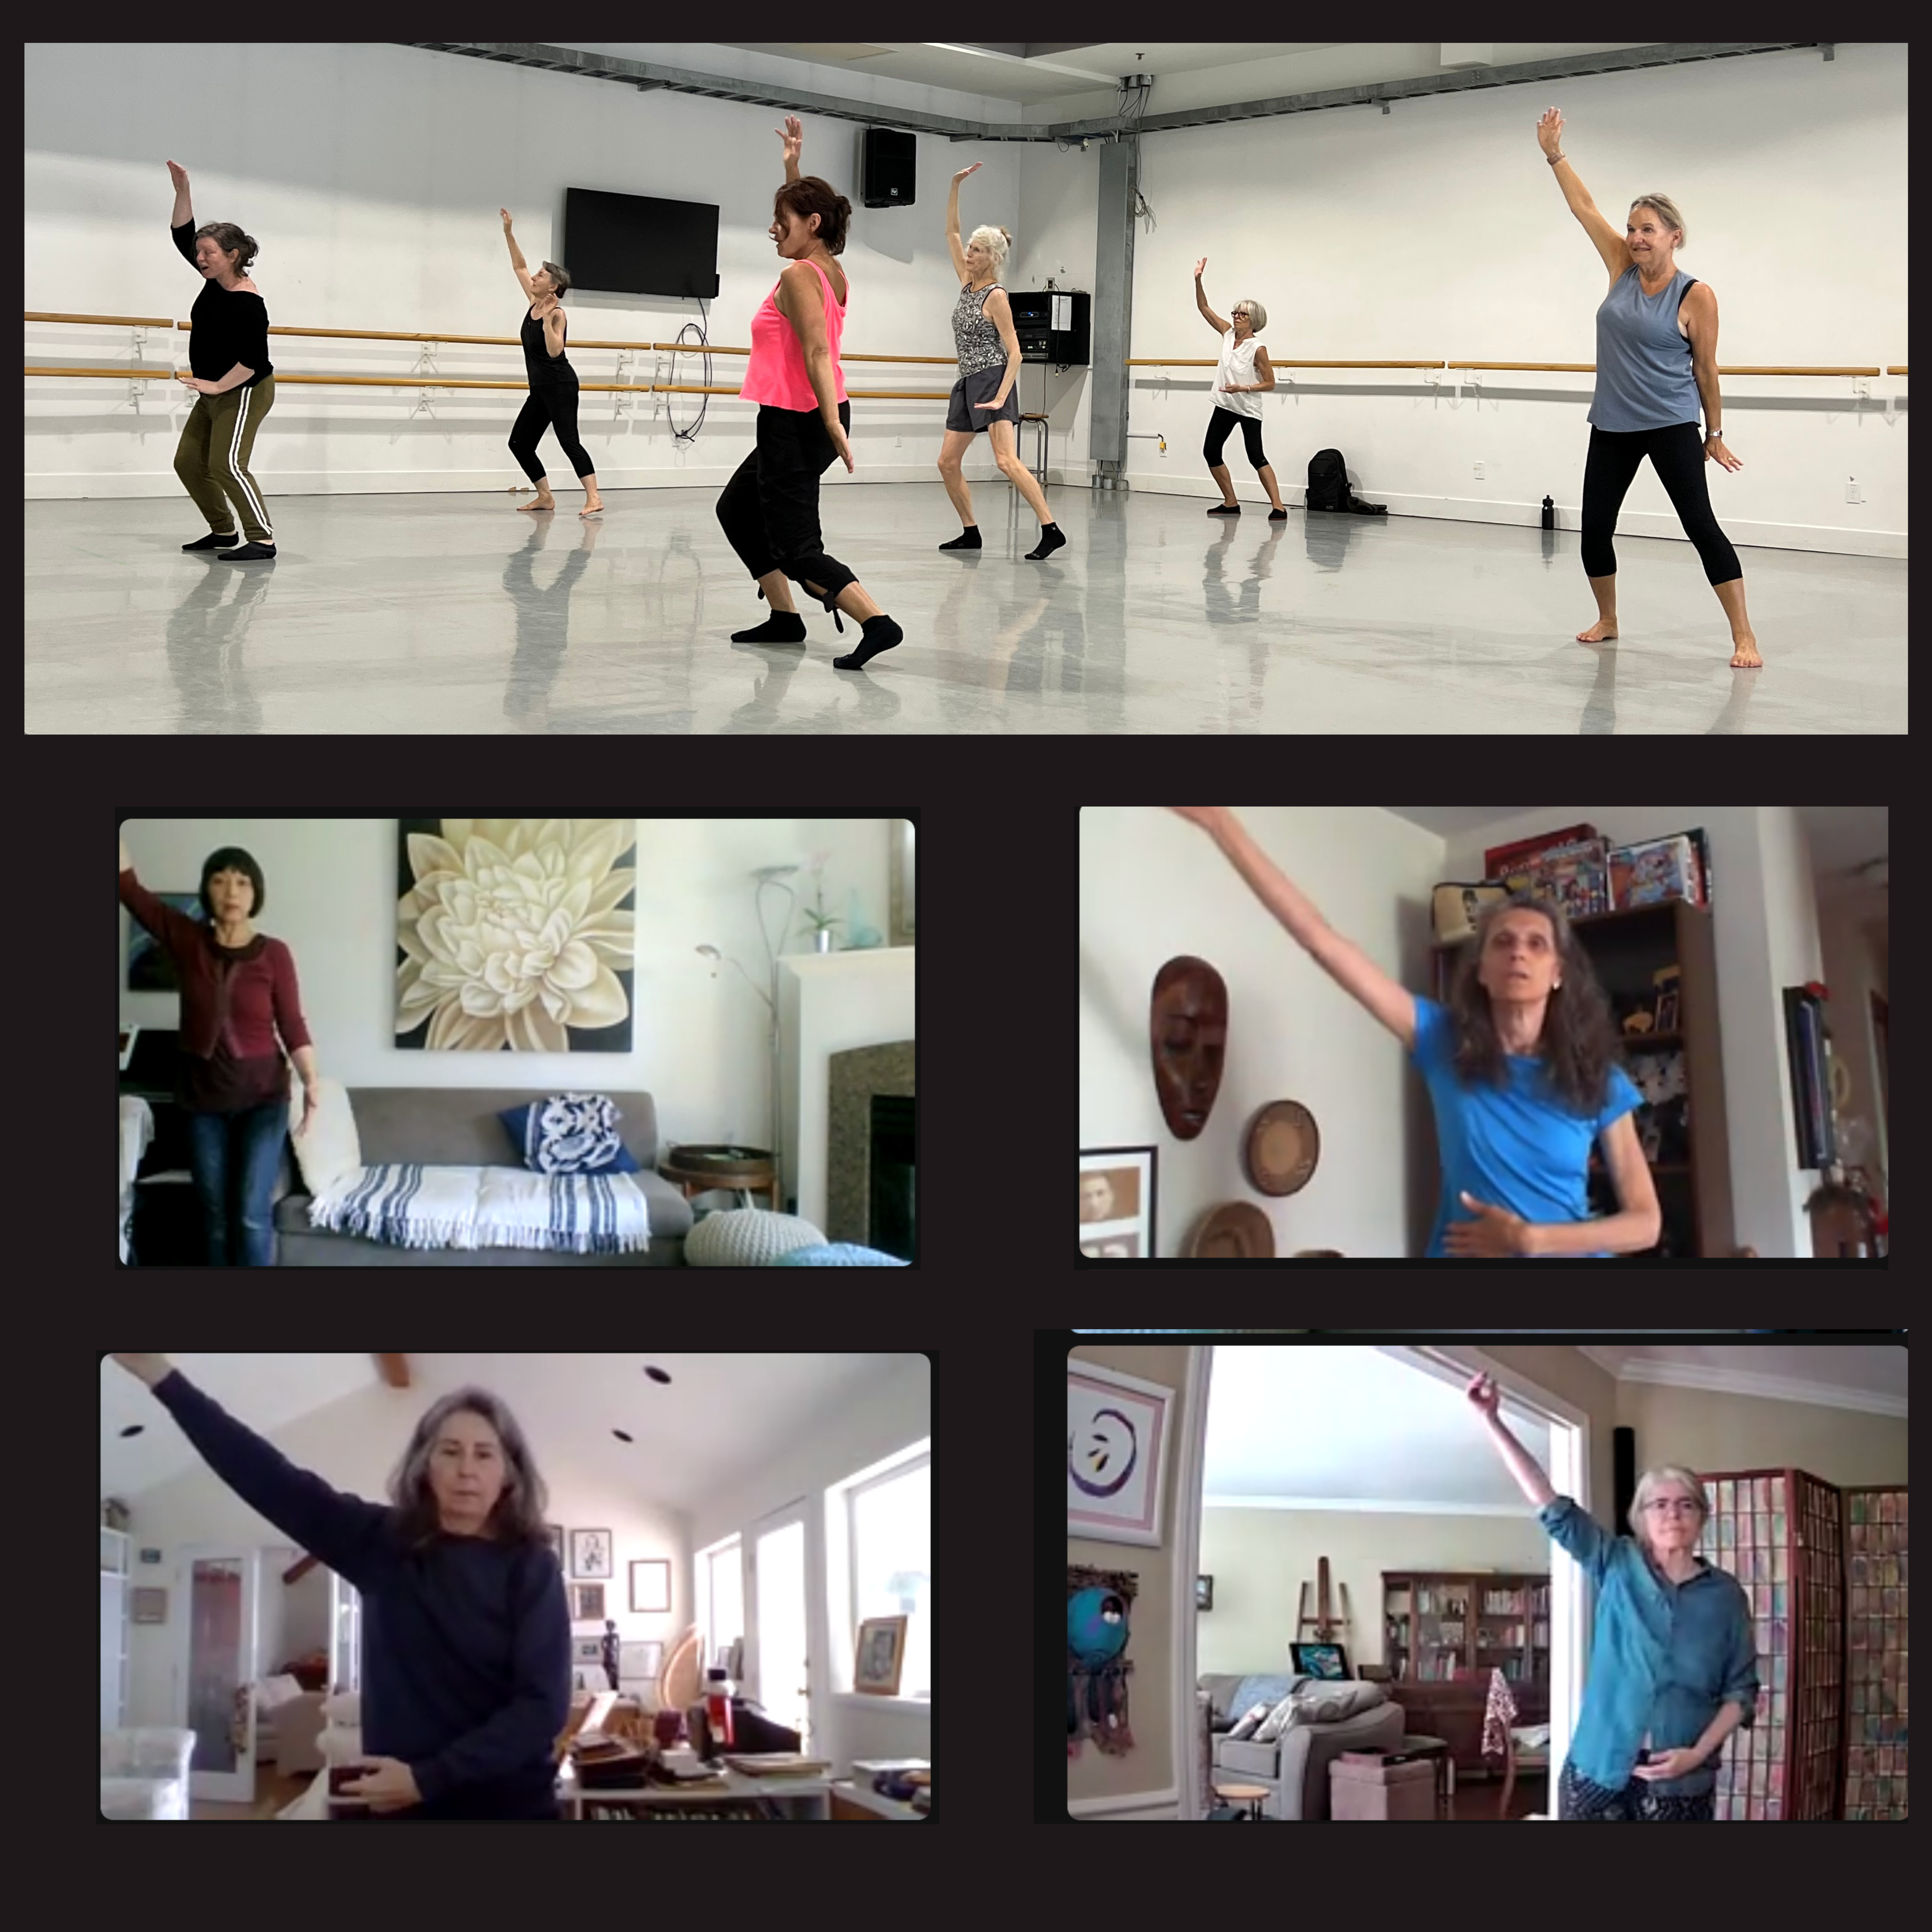 Photo collage: the top image is Six dancers in a bright studio. They are all wearing rehearsal clothing and are facing towards the mirror, slightly away from the camera. They have their right arms up in the air and their knees slightly bent. Their body's are slightly arched in a exuberant fashion. Under this is a collage of four Zoom screens of people dancing in living rooms. They have their right arms reaching upwards. Their left arms are down across their stomachs.